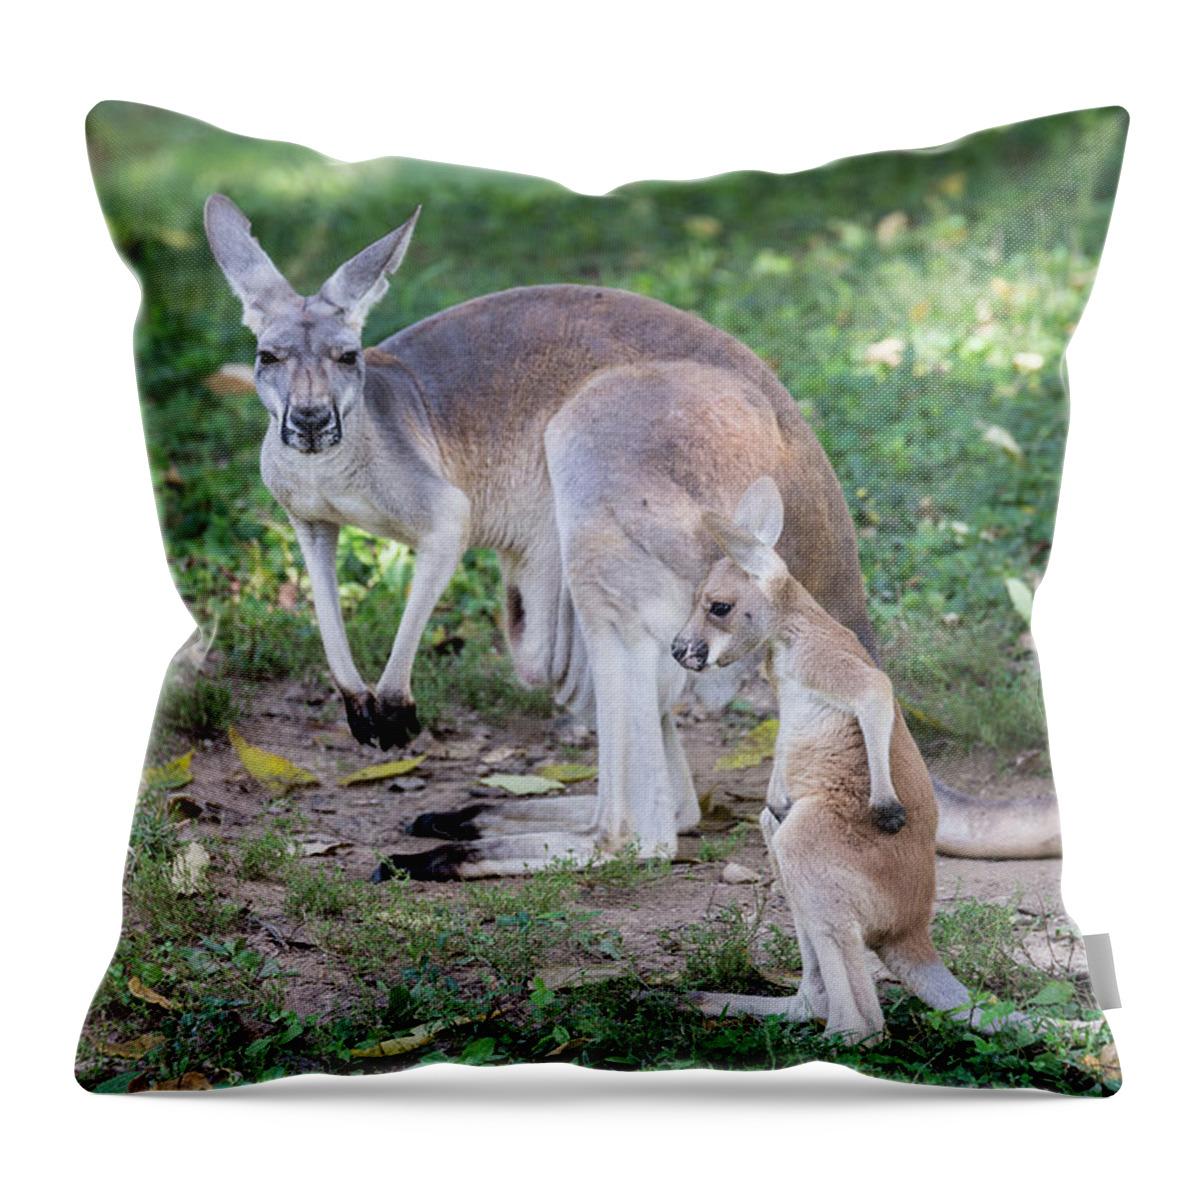 Kangaroo Throw Pillow featuring the photograph Baby Roo by Andrea Silies